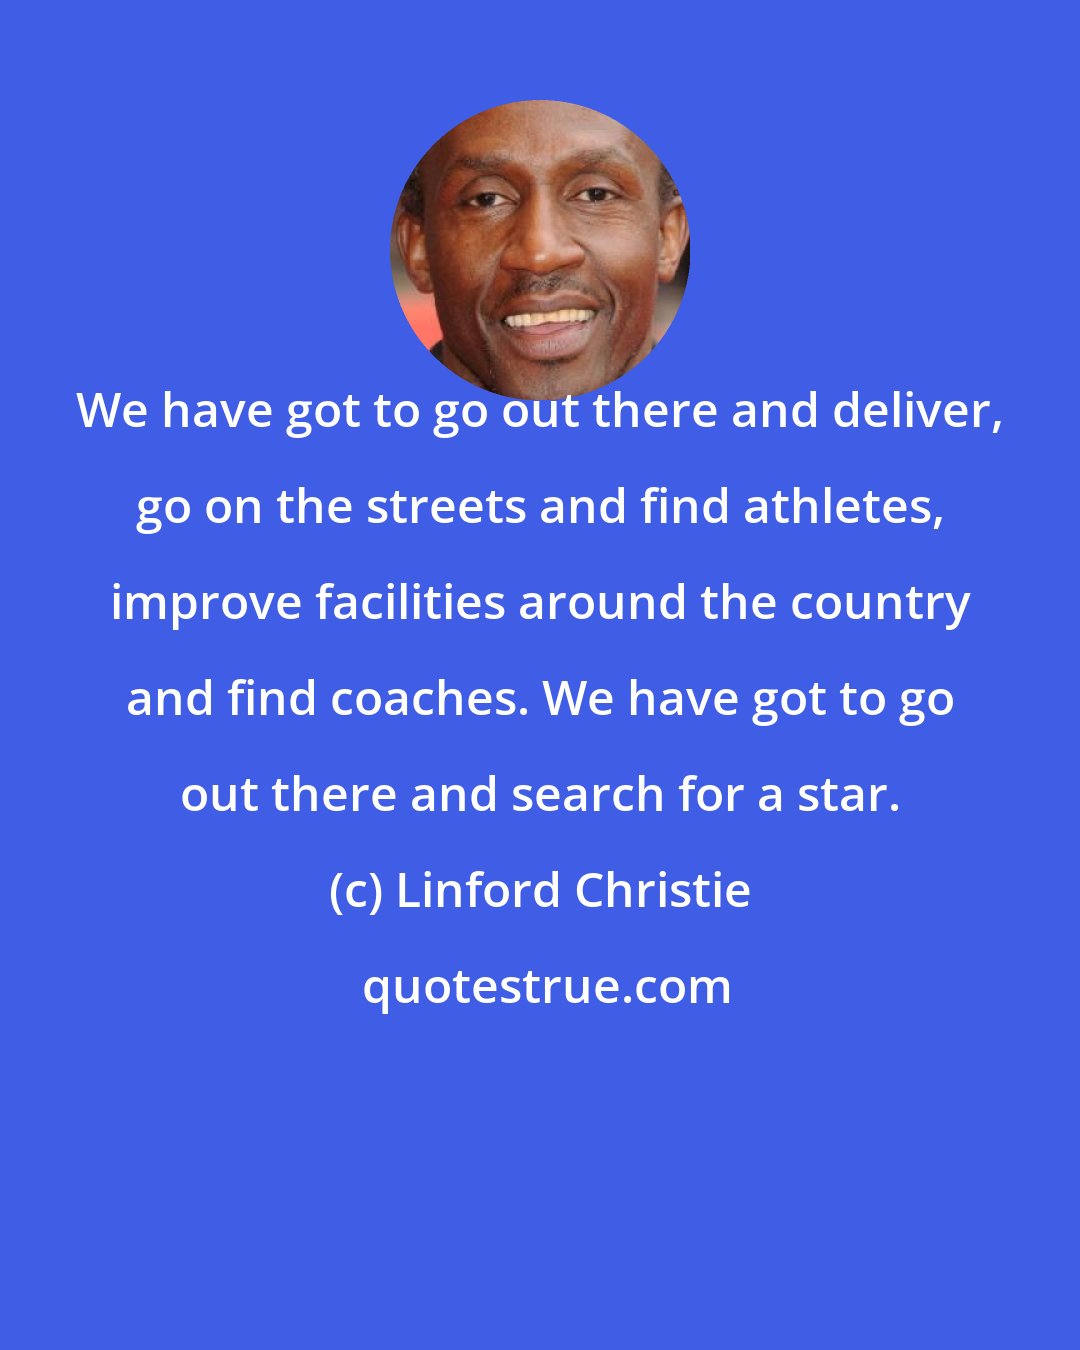 Linford Christie: We have got to go out there and deliver, go on the streets and find athletes, improve facilities around the country and find coaches. We have got to go out there and search for a star.